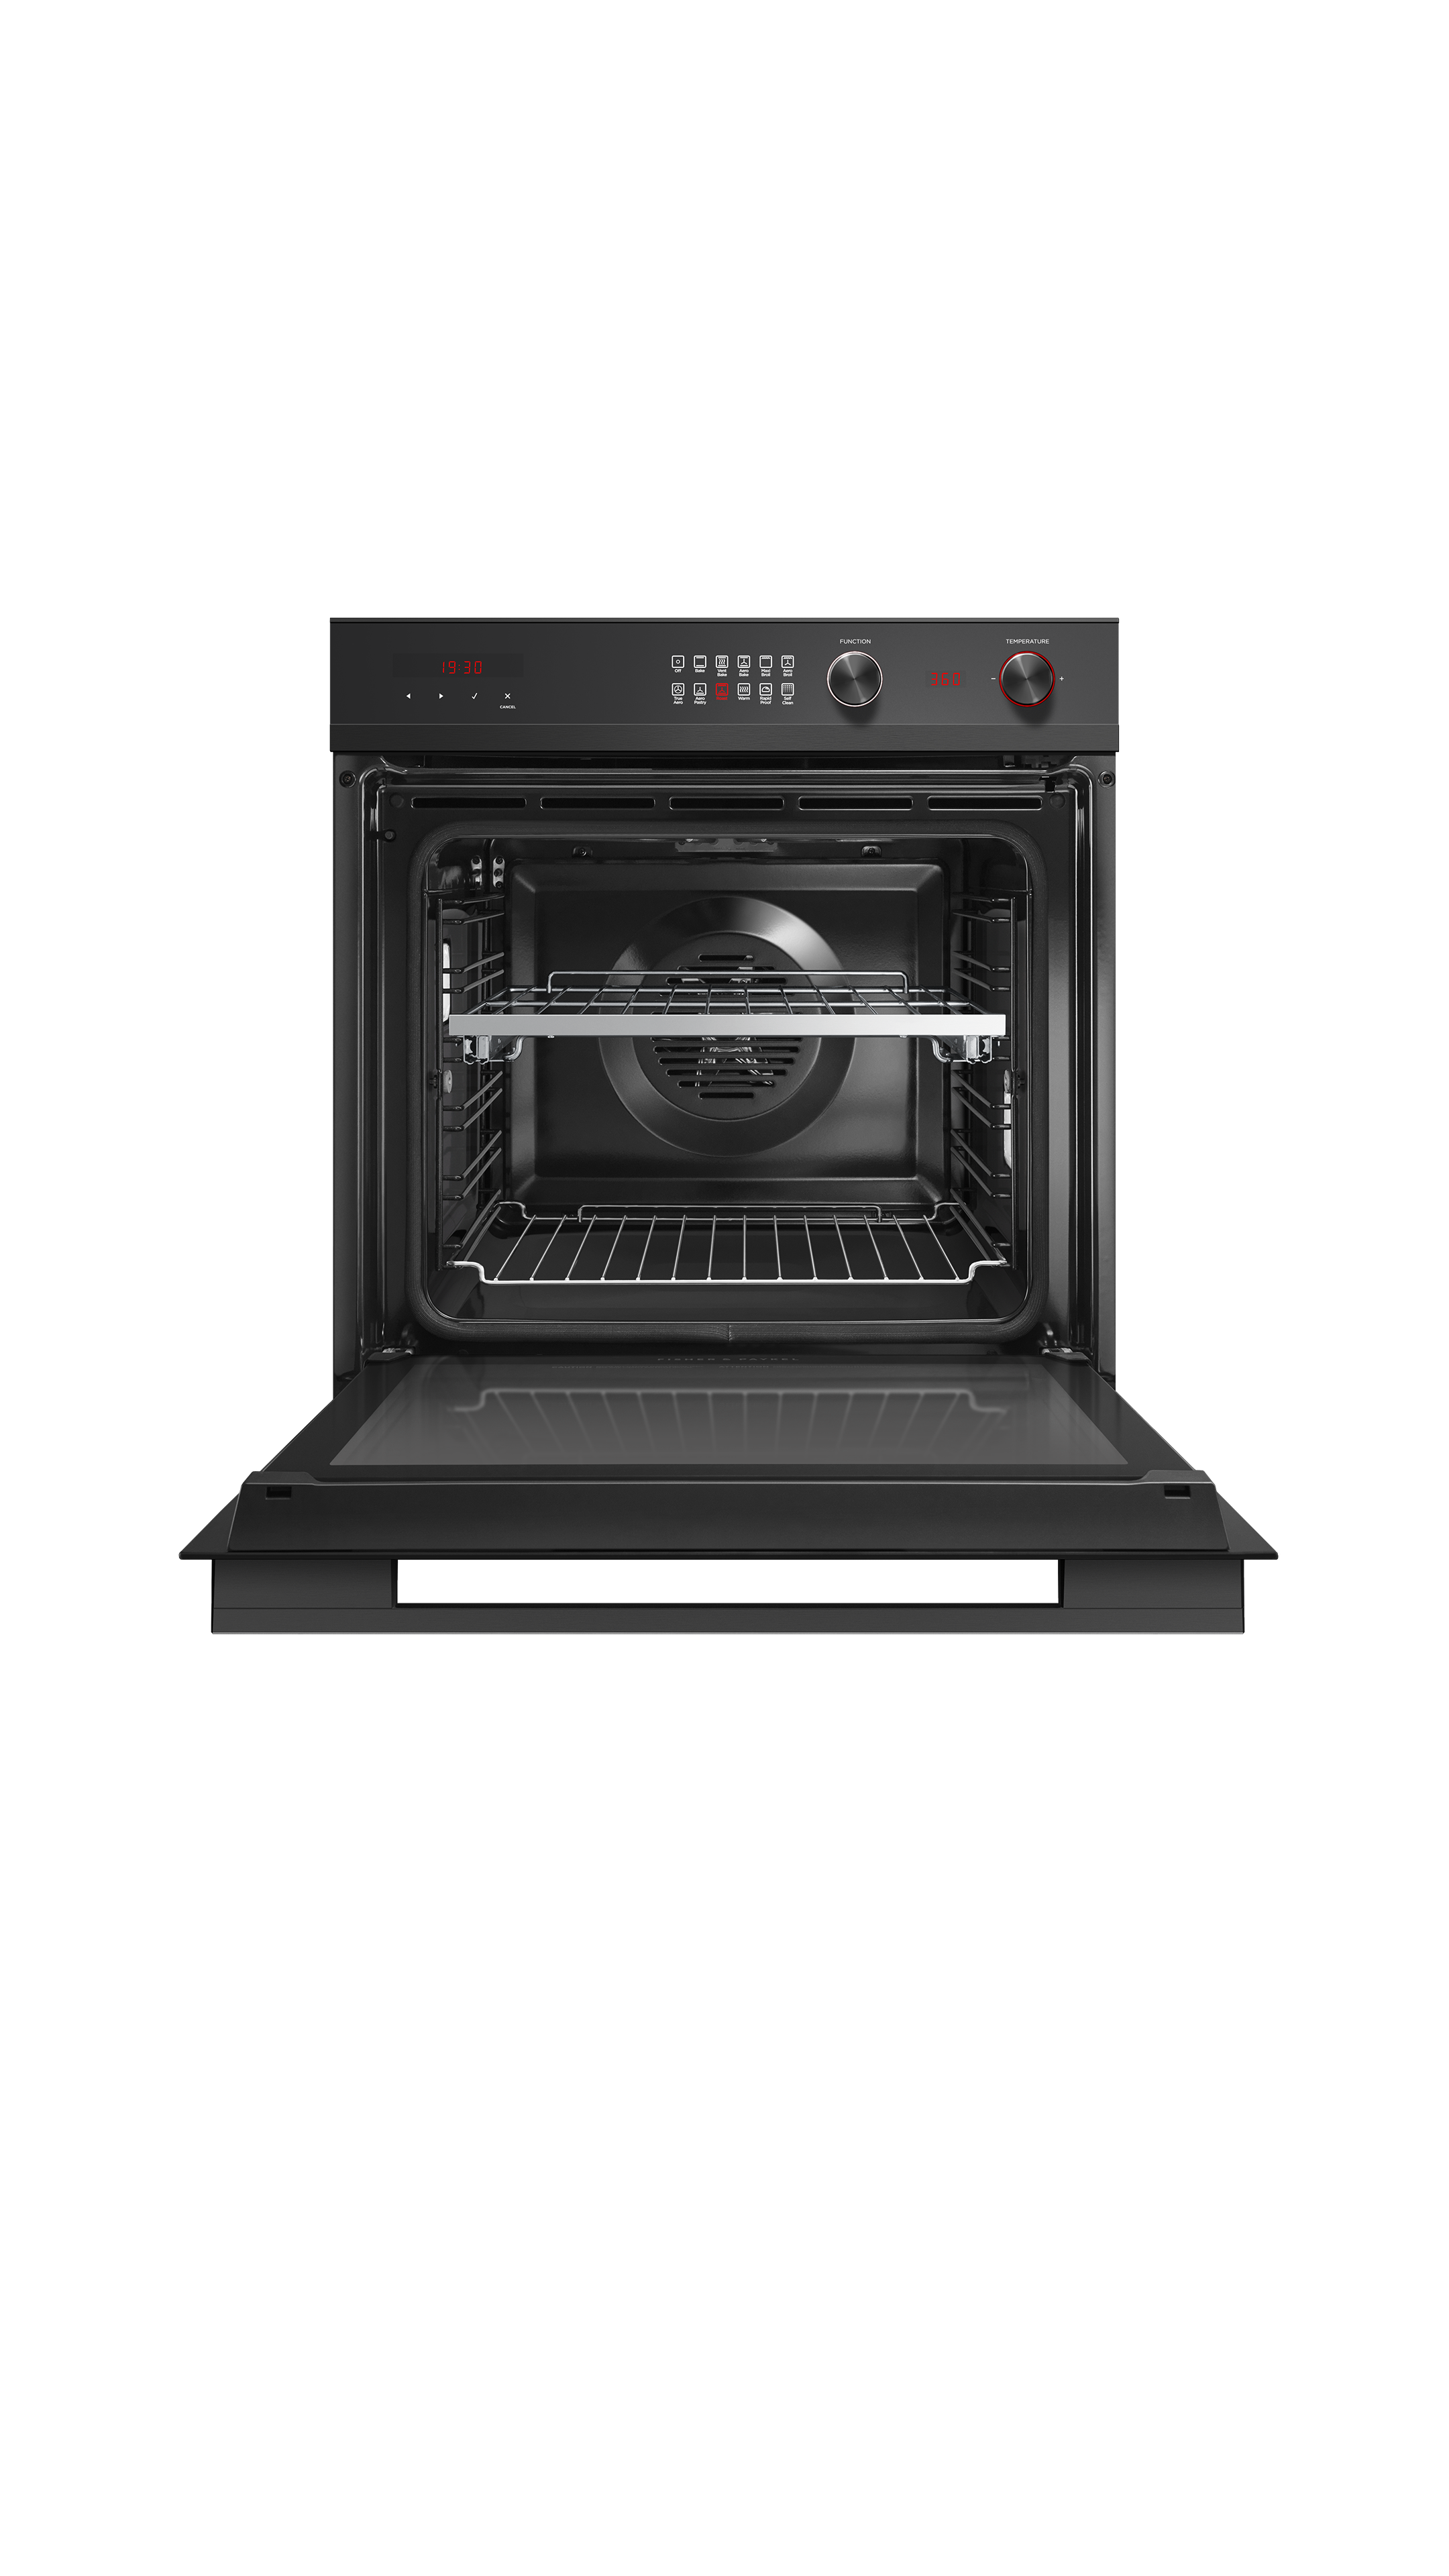 Fisher and Paykel Oven, 24", 11 Function, Self-cleaning